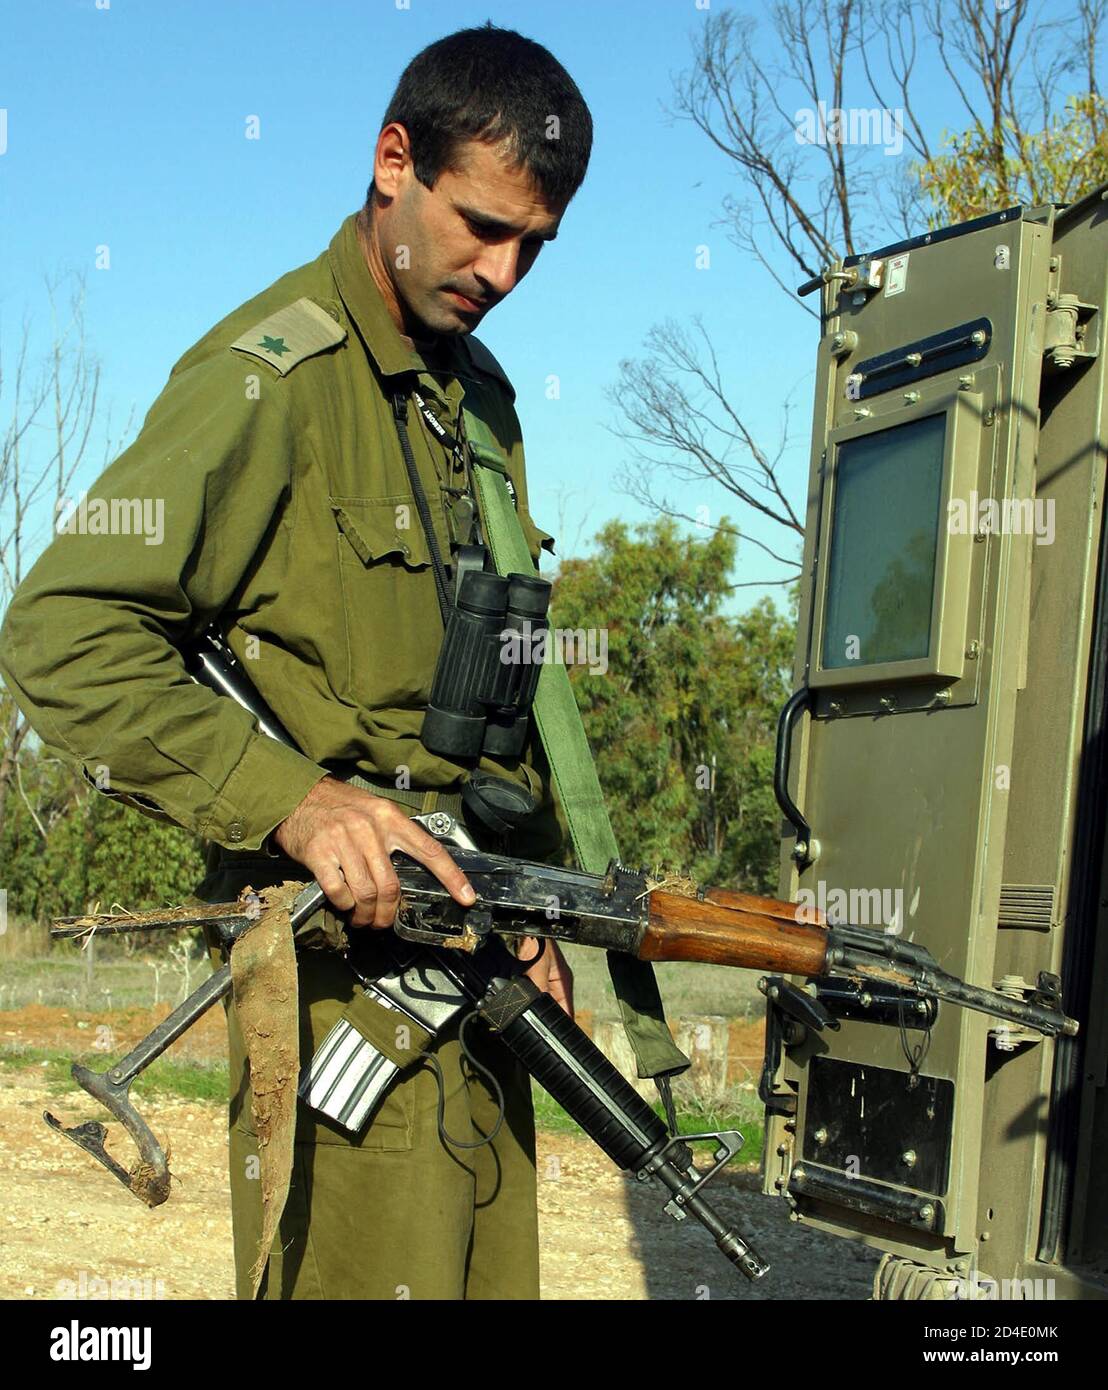 An Israeli army officer examines an AK-47 assault rifle in Bari, a Kibbutz  between teh Gaza Strip and Israel December 30, 2002. On Monday, troops  killed a Hamas militant who fought a